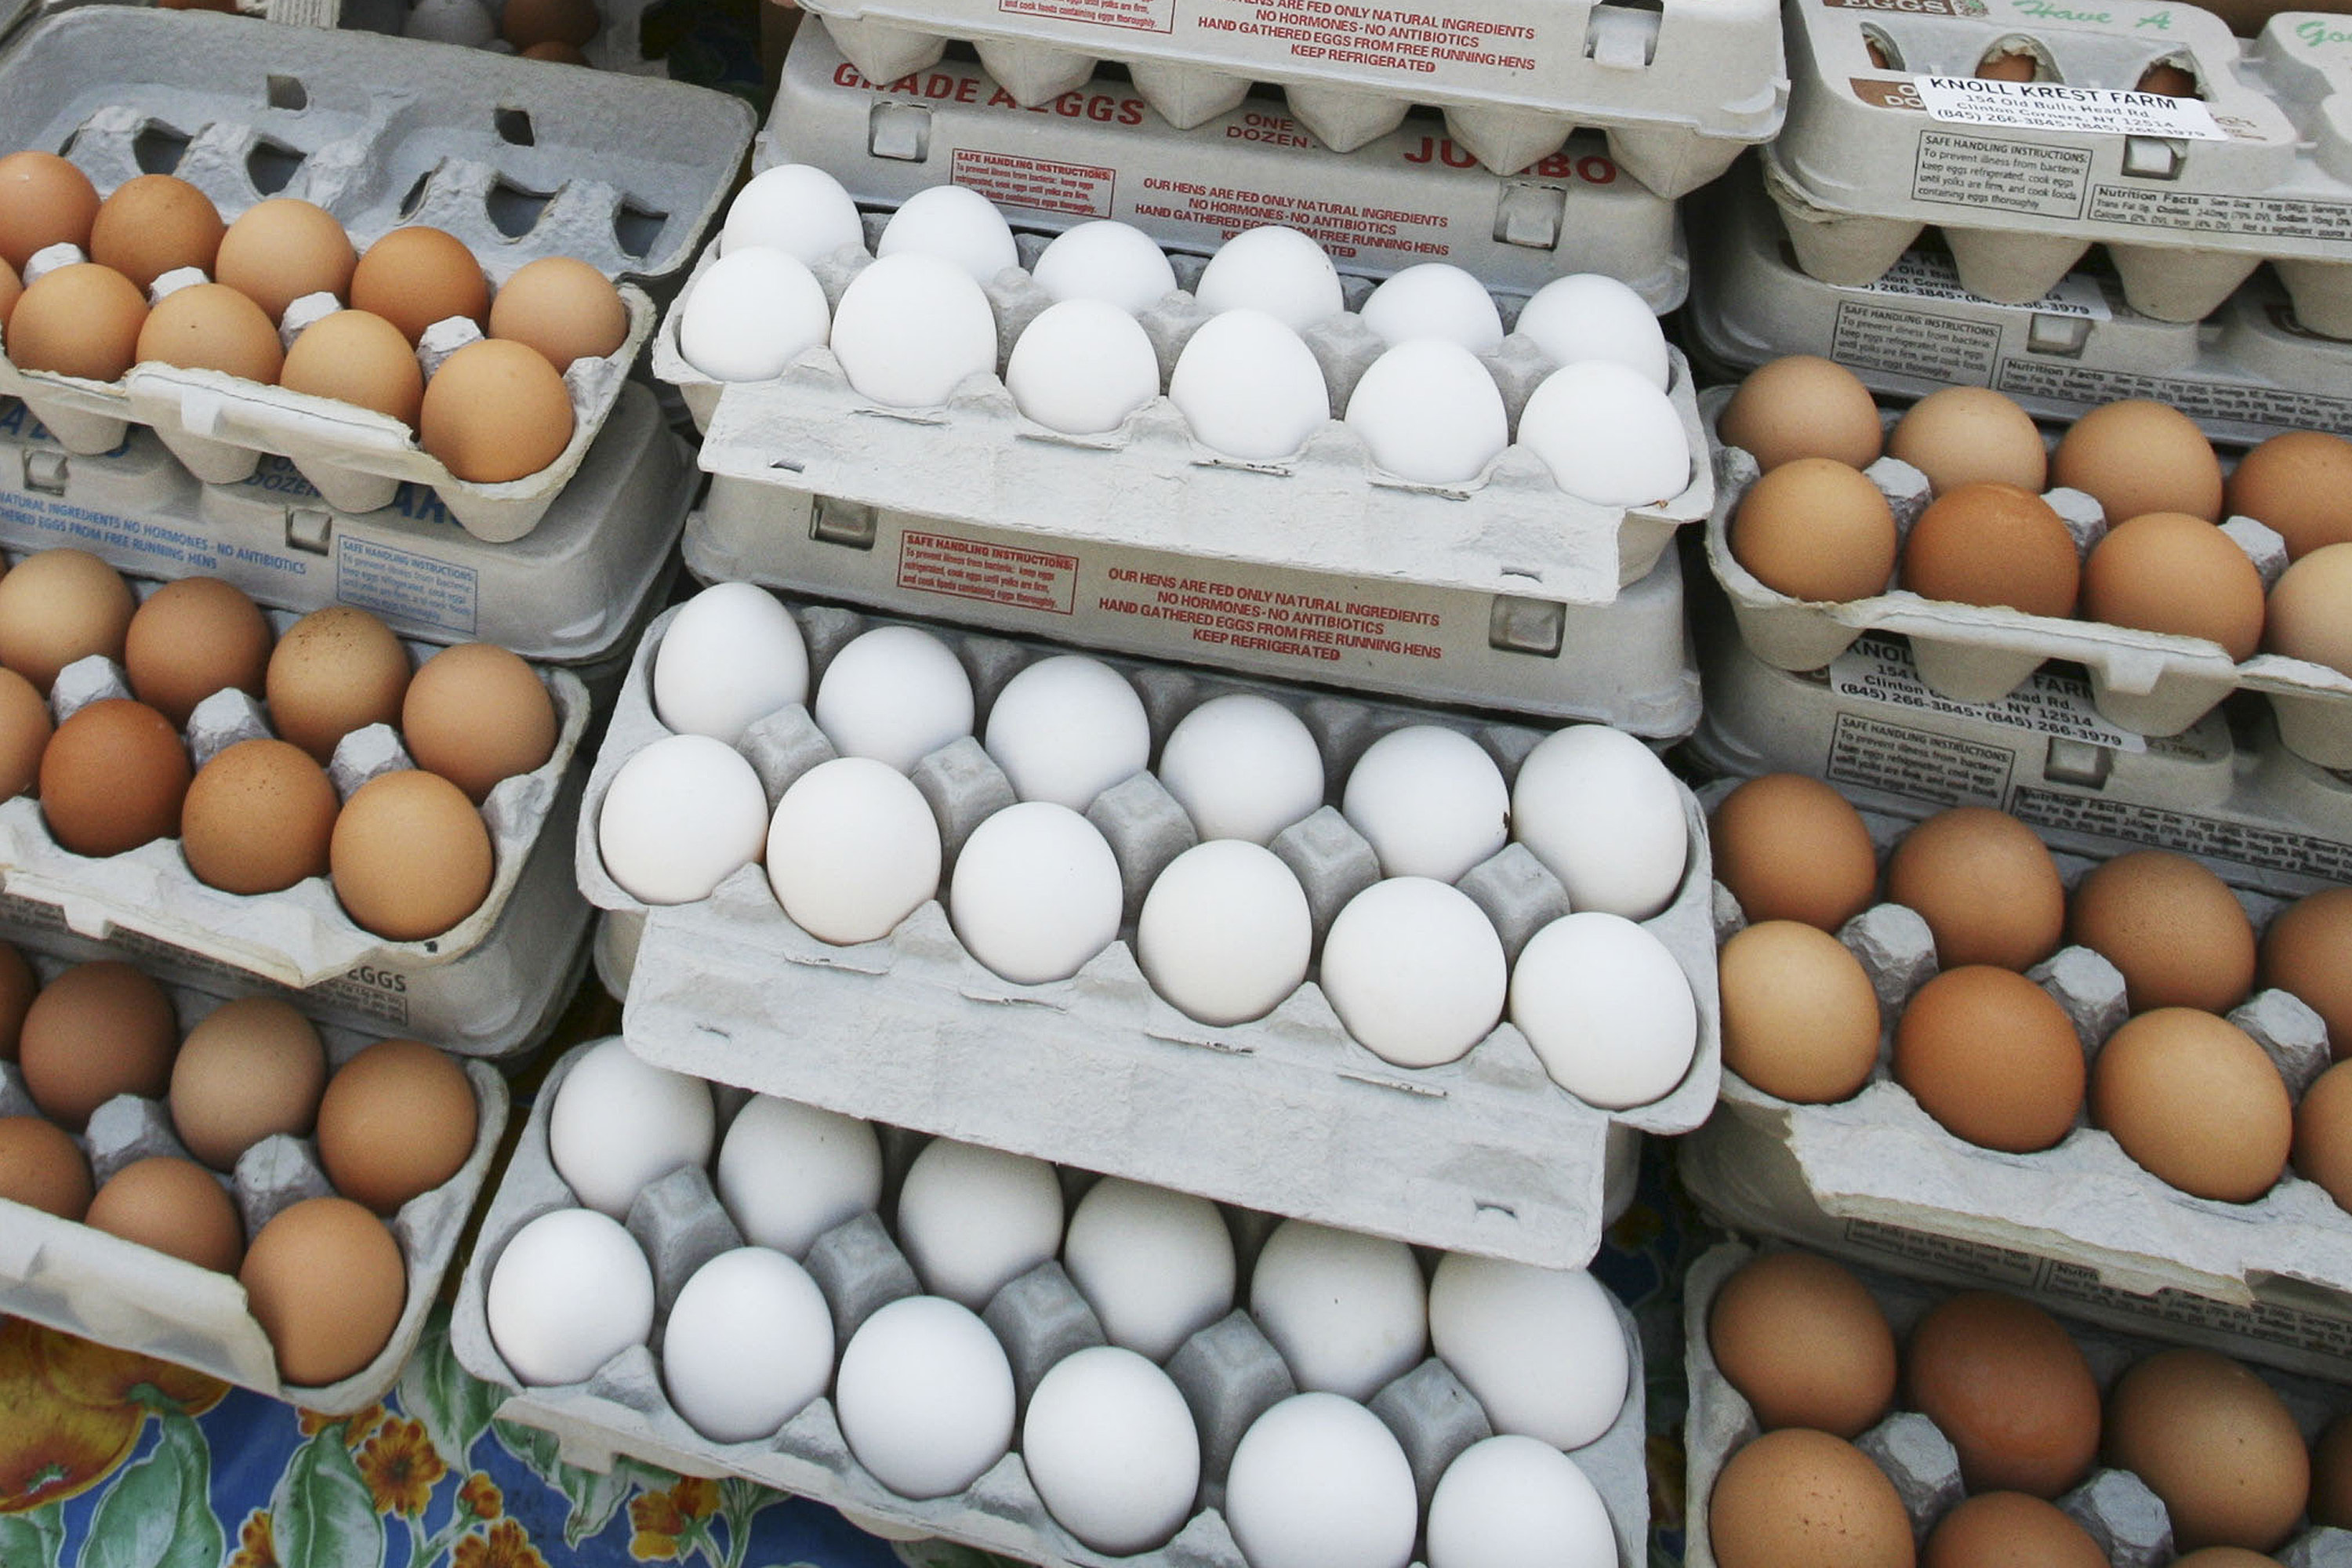 Wang Mo stacks cartons of eggs for sale at the Knoll Krest Farm stand in the Union Square green market on Wednesday, May 14, 2008 in New York. Inflation pressures eased a bit in April despite the biggest jump in food prices in 18 years. (AP Photo/Mark Lennihan)